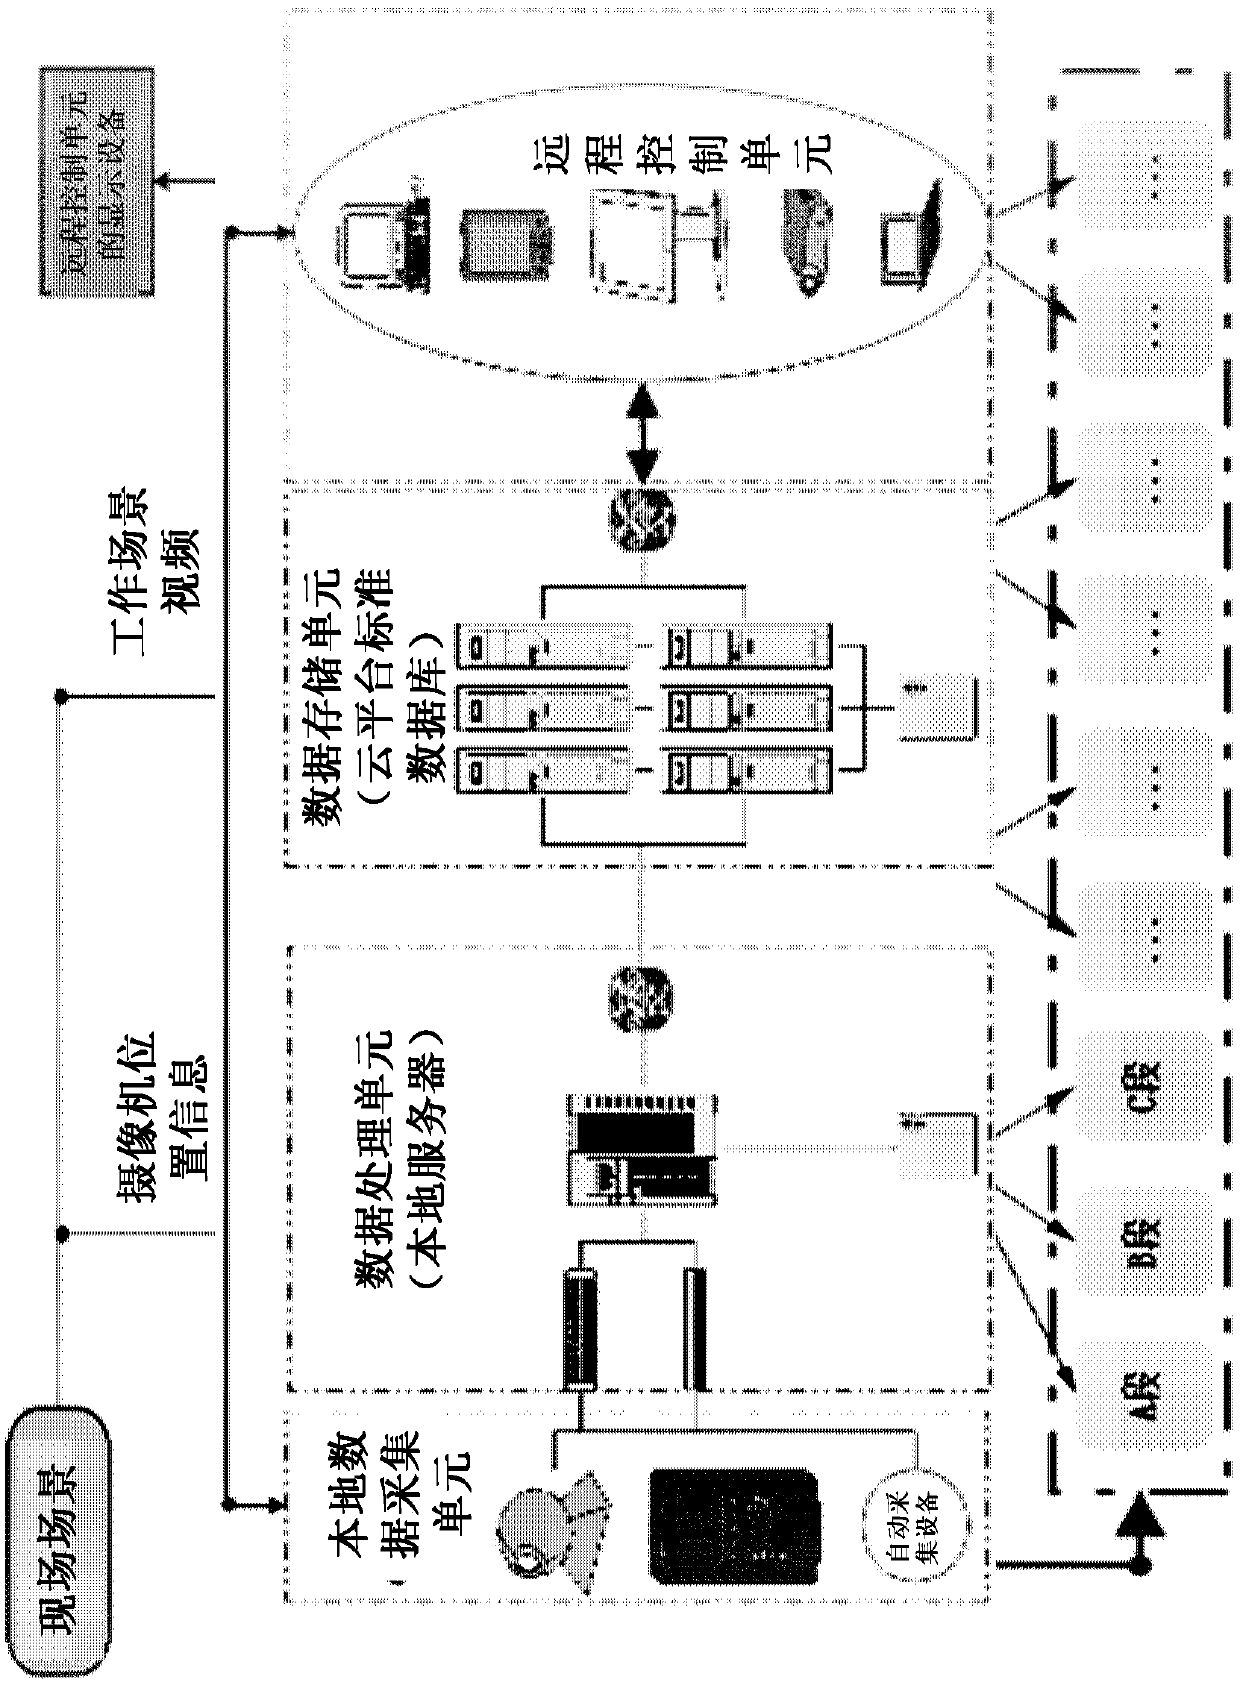 A remote fault resolution system and method for production equipment